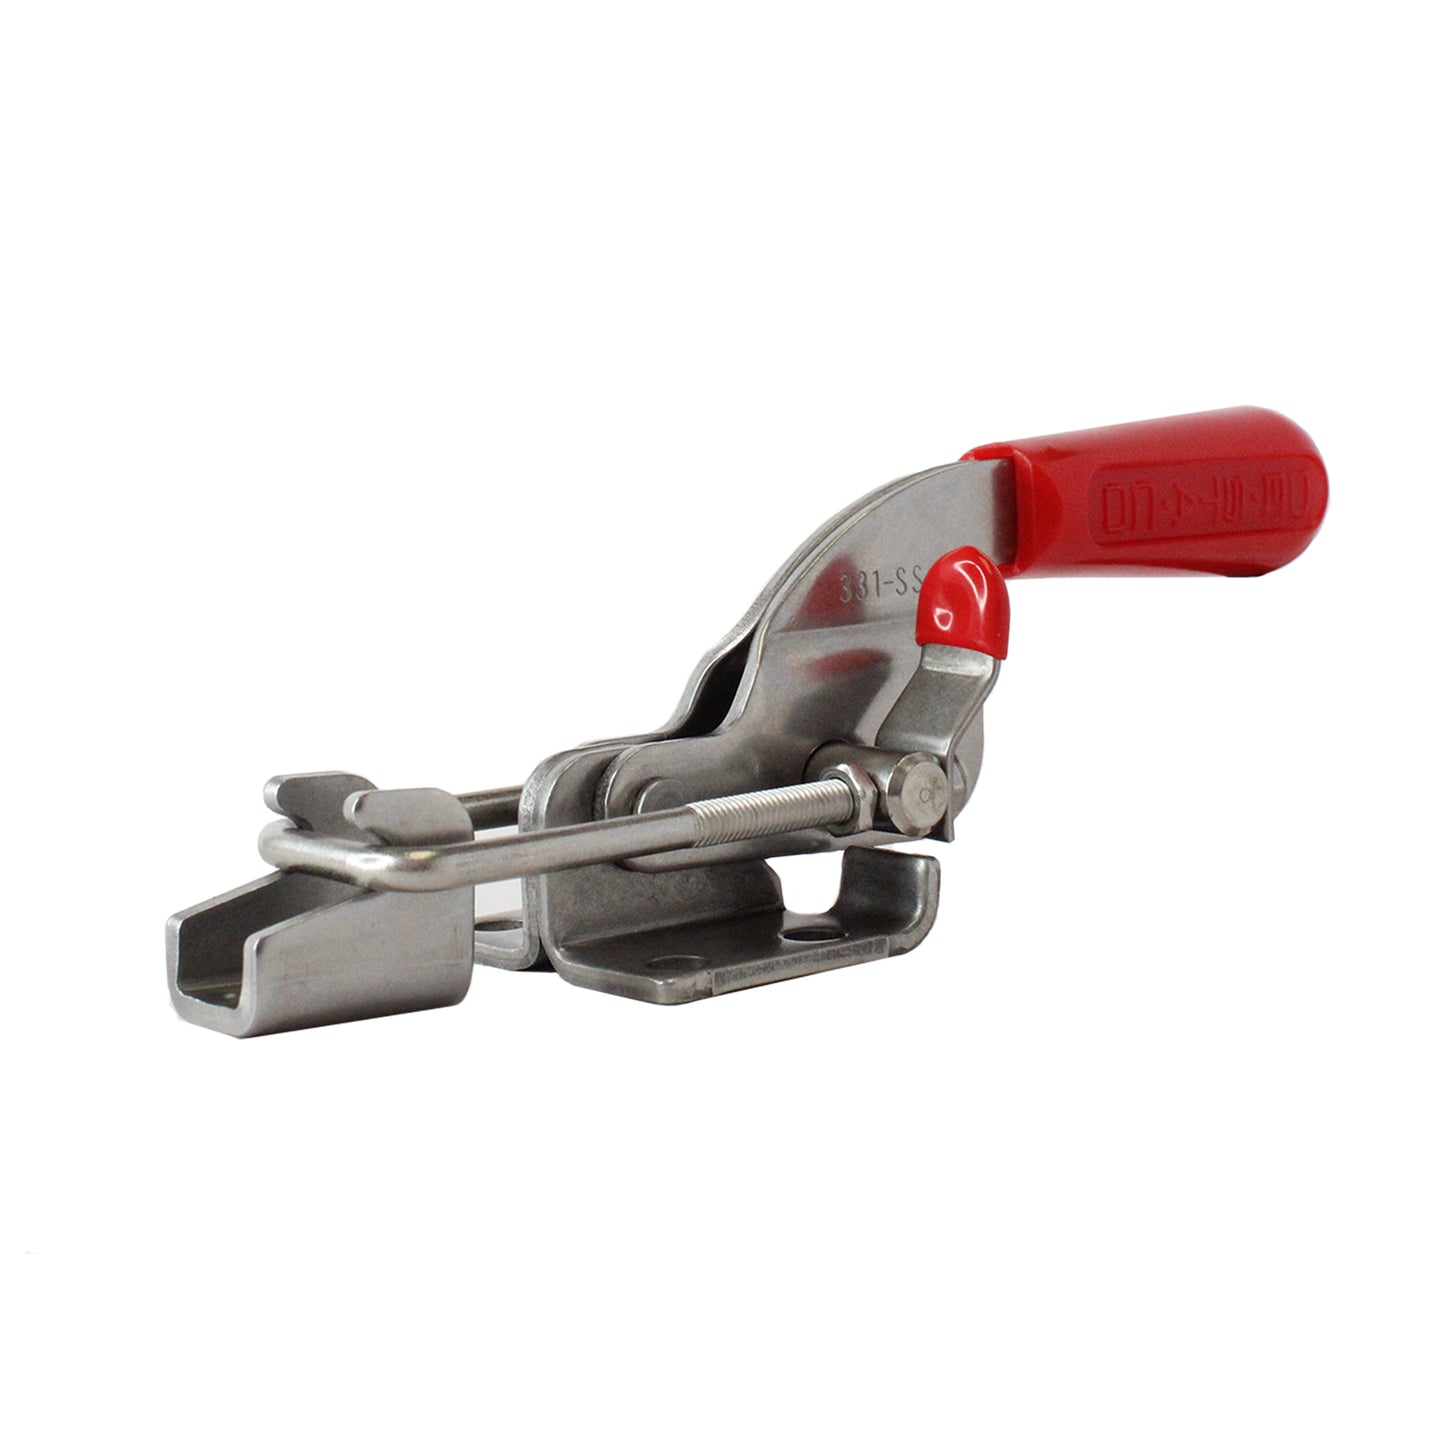 Destaco 331-SS Pull Action Latch Clamp